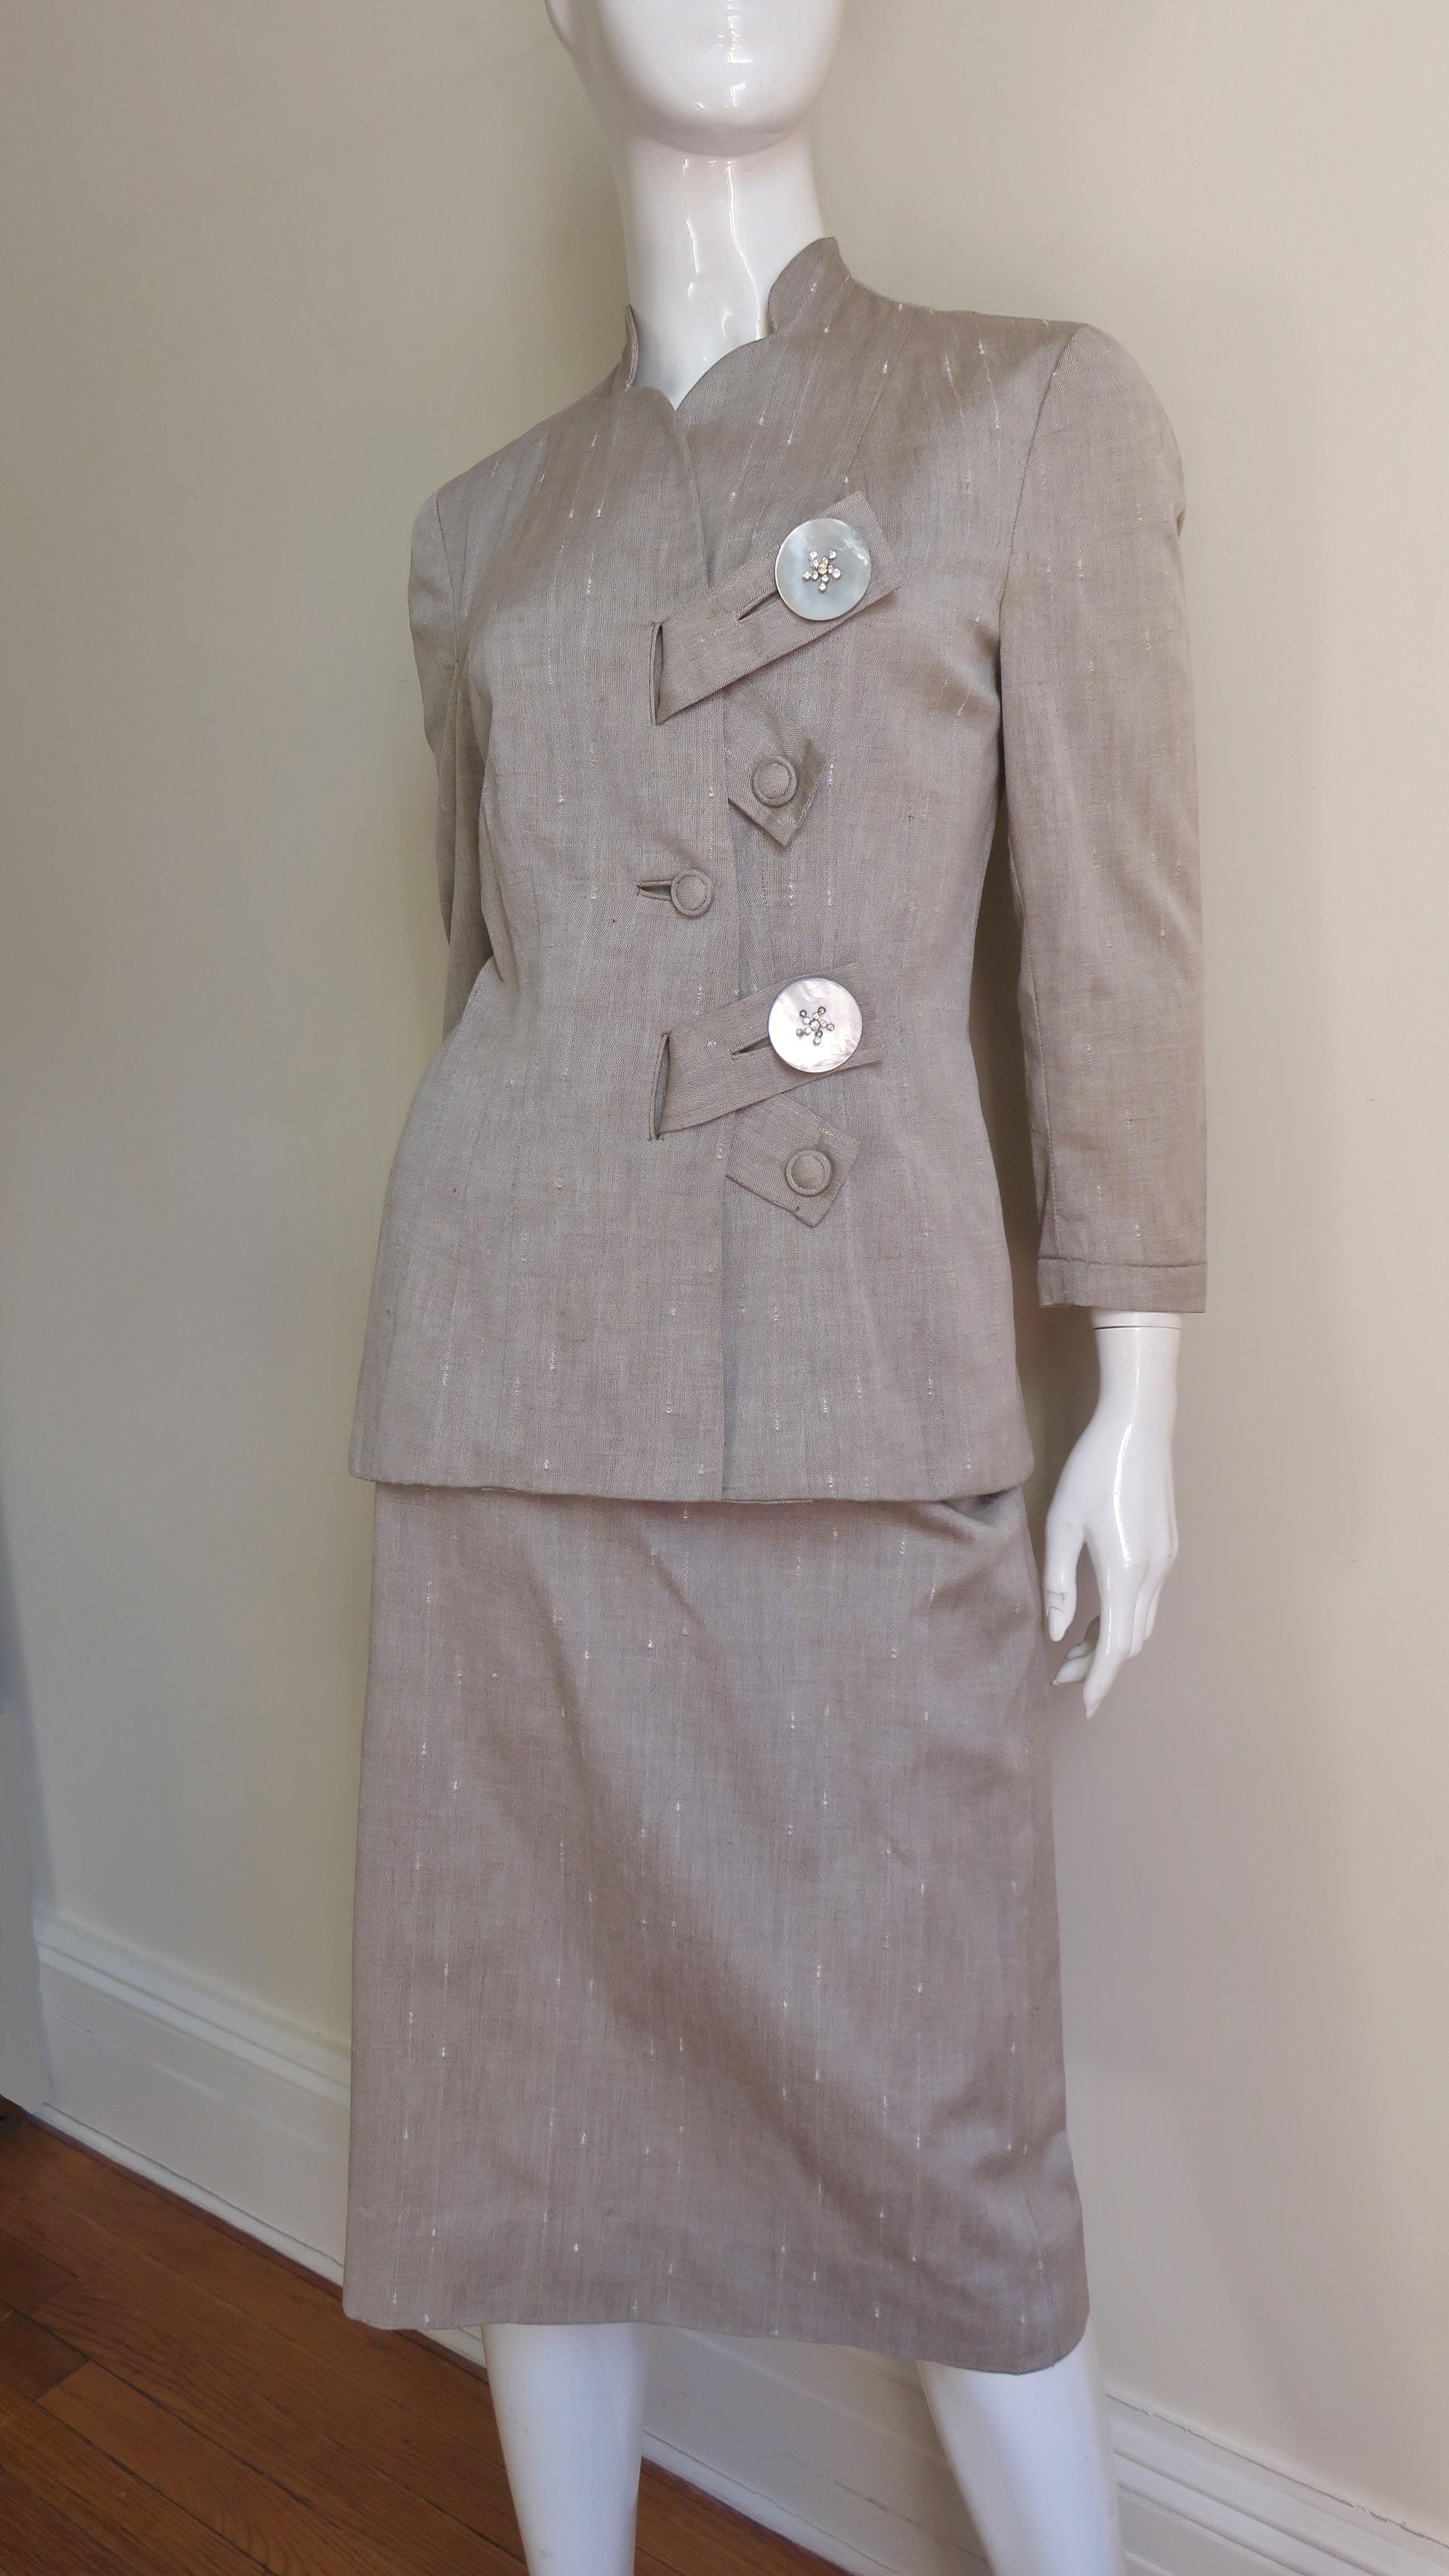 A fabulous suit from Eisenberg Originals in a taupe linen cotton blend.  It has 3/4 length sleeves and a stunning unique front closing via diagonal tabs through bound buttonholes and gorgeous rhinestone incrusted mother of pearl buttons with smaller